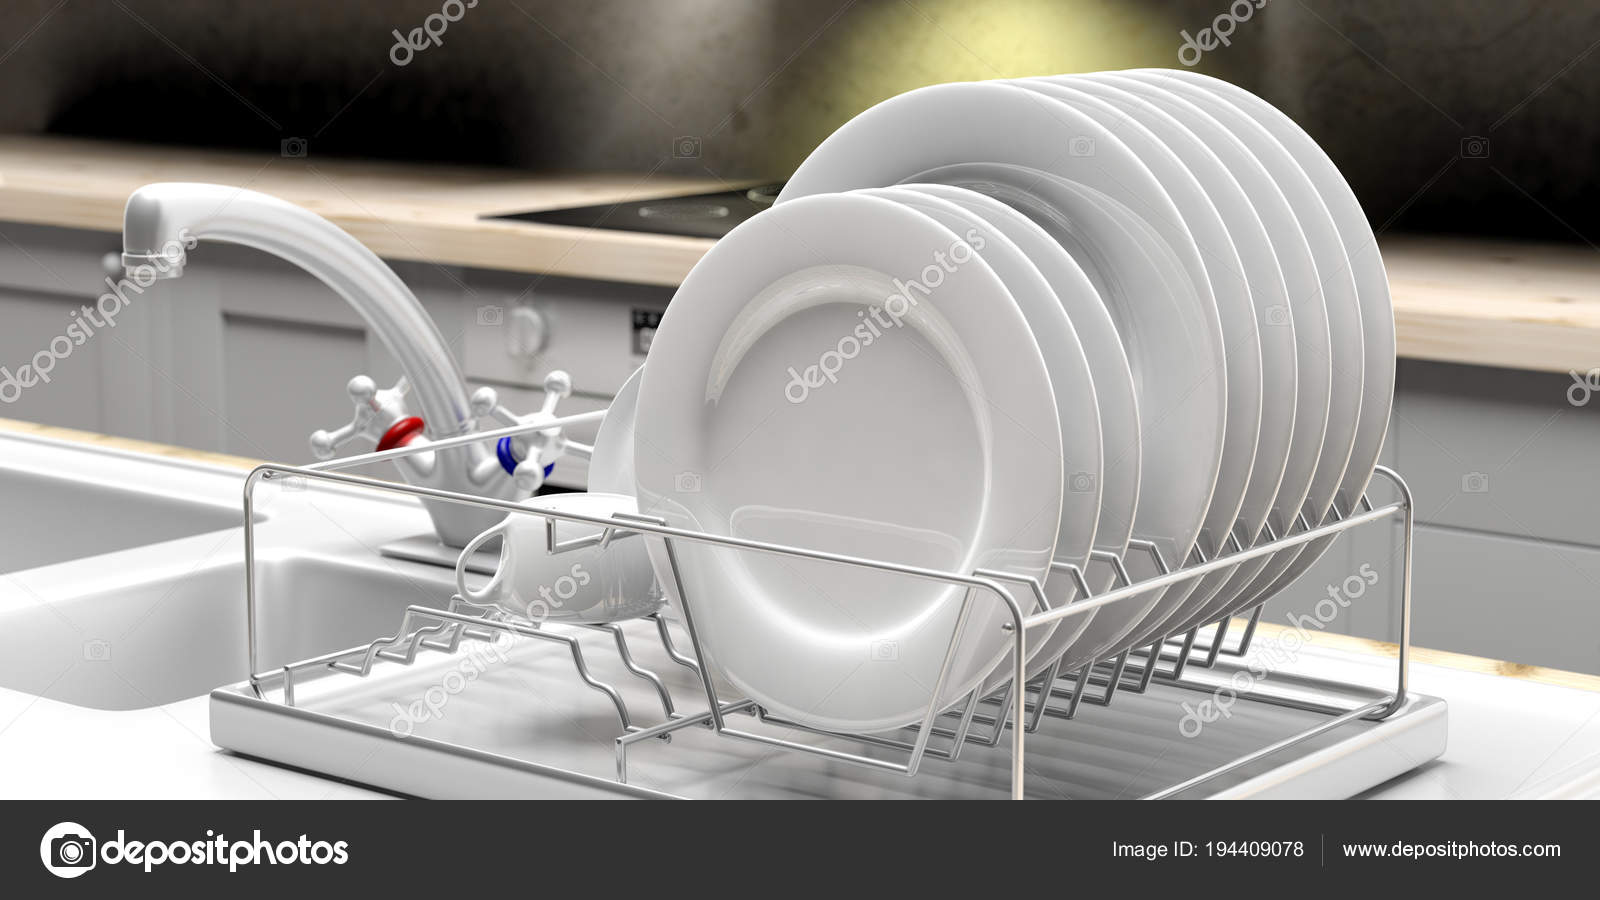 Dish drying rack with white plates on a white kitchen counter. 3d